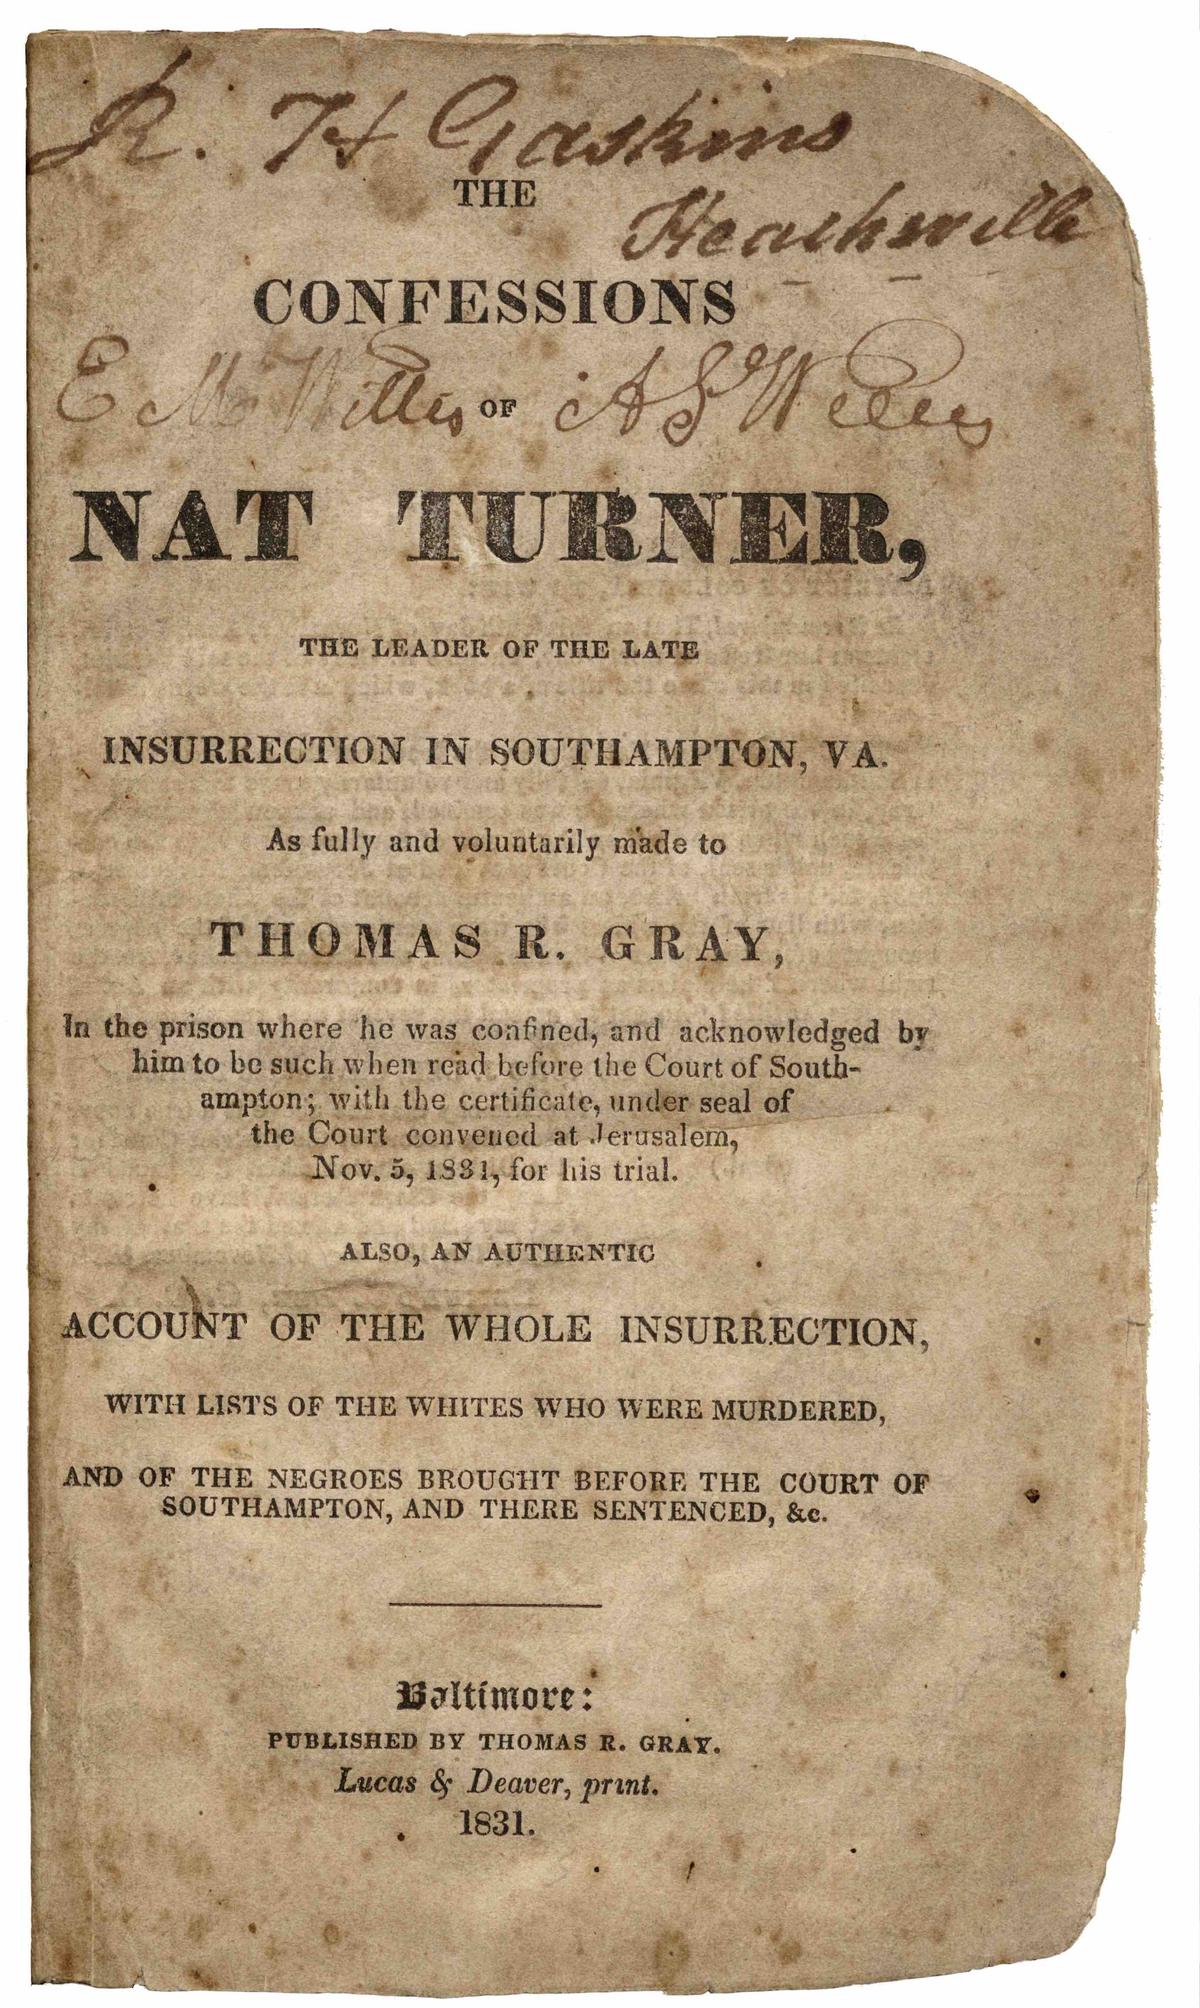 An account of Nat Turner's insurrection, recounted to lawyer Thomas Gray while Turner was imprisoned, was published in 1831. (Documenting the American South, University Library, The University of North Carolina at Chapel Hill)